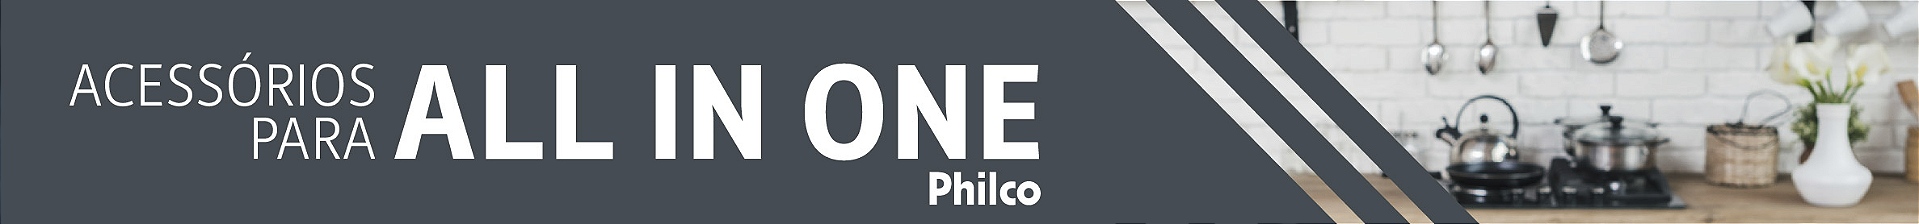 All in one - philco